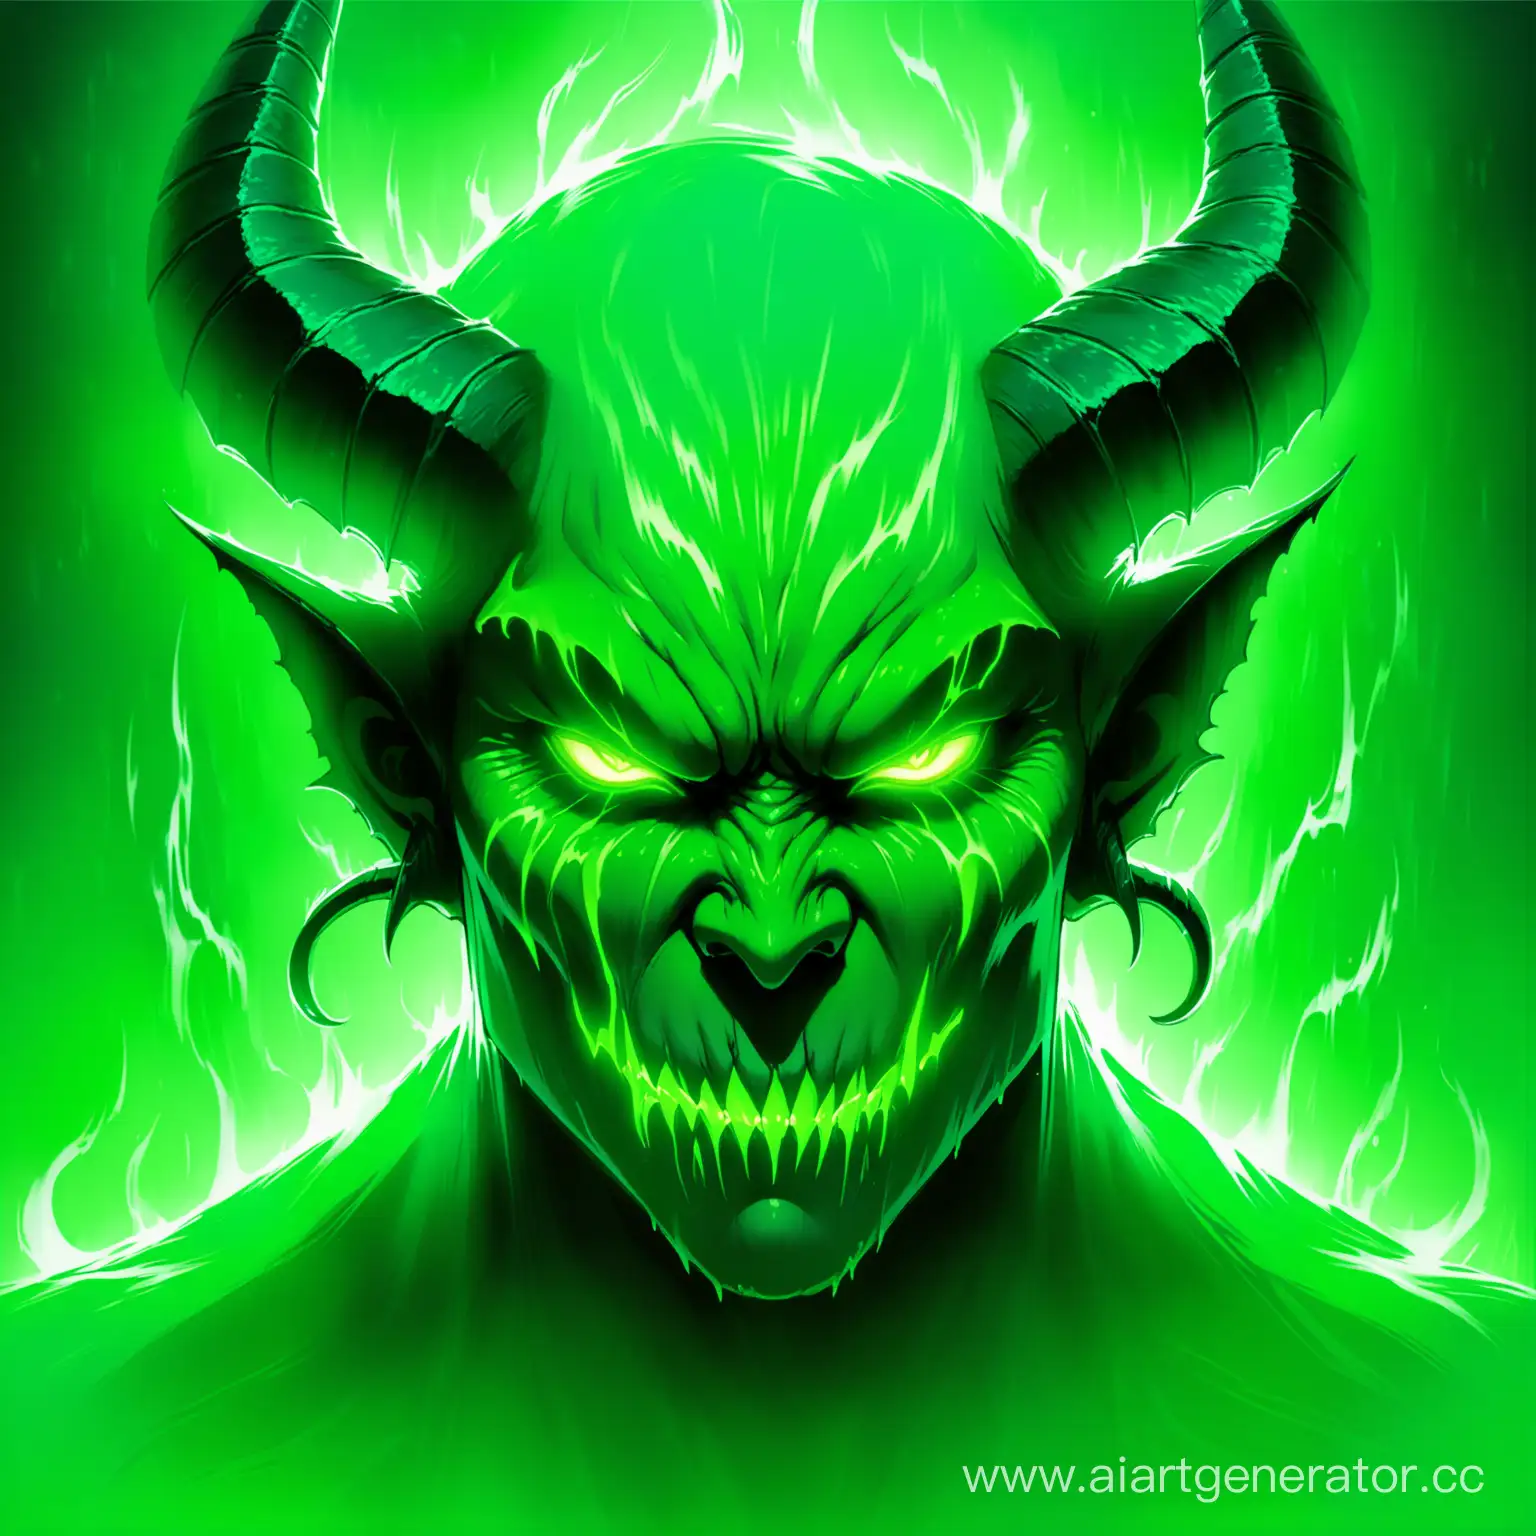 Sinister-Demon-with-Neon-Green-Features-Emerging-from-Eerie-Mist